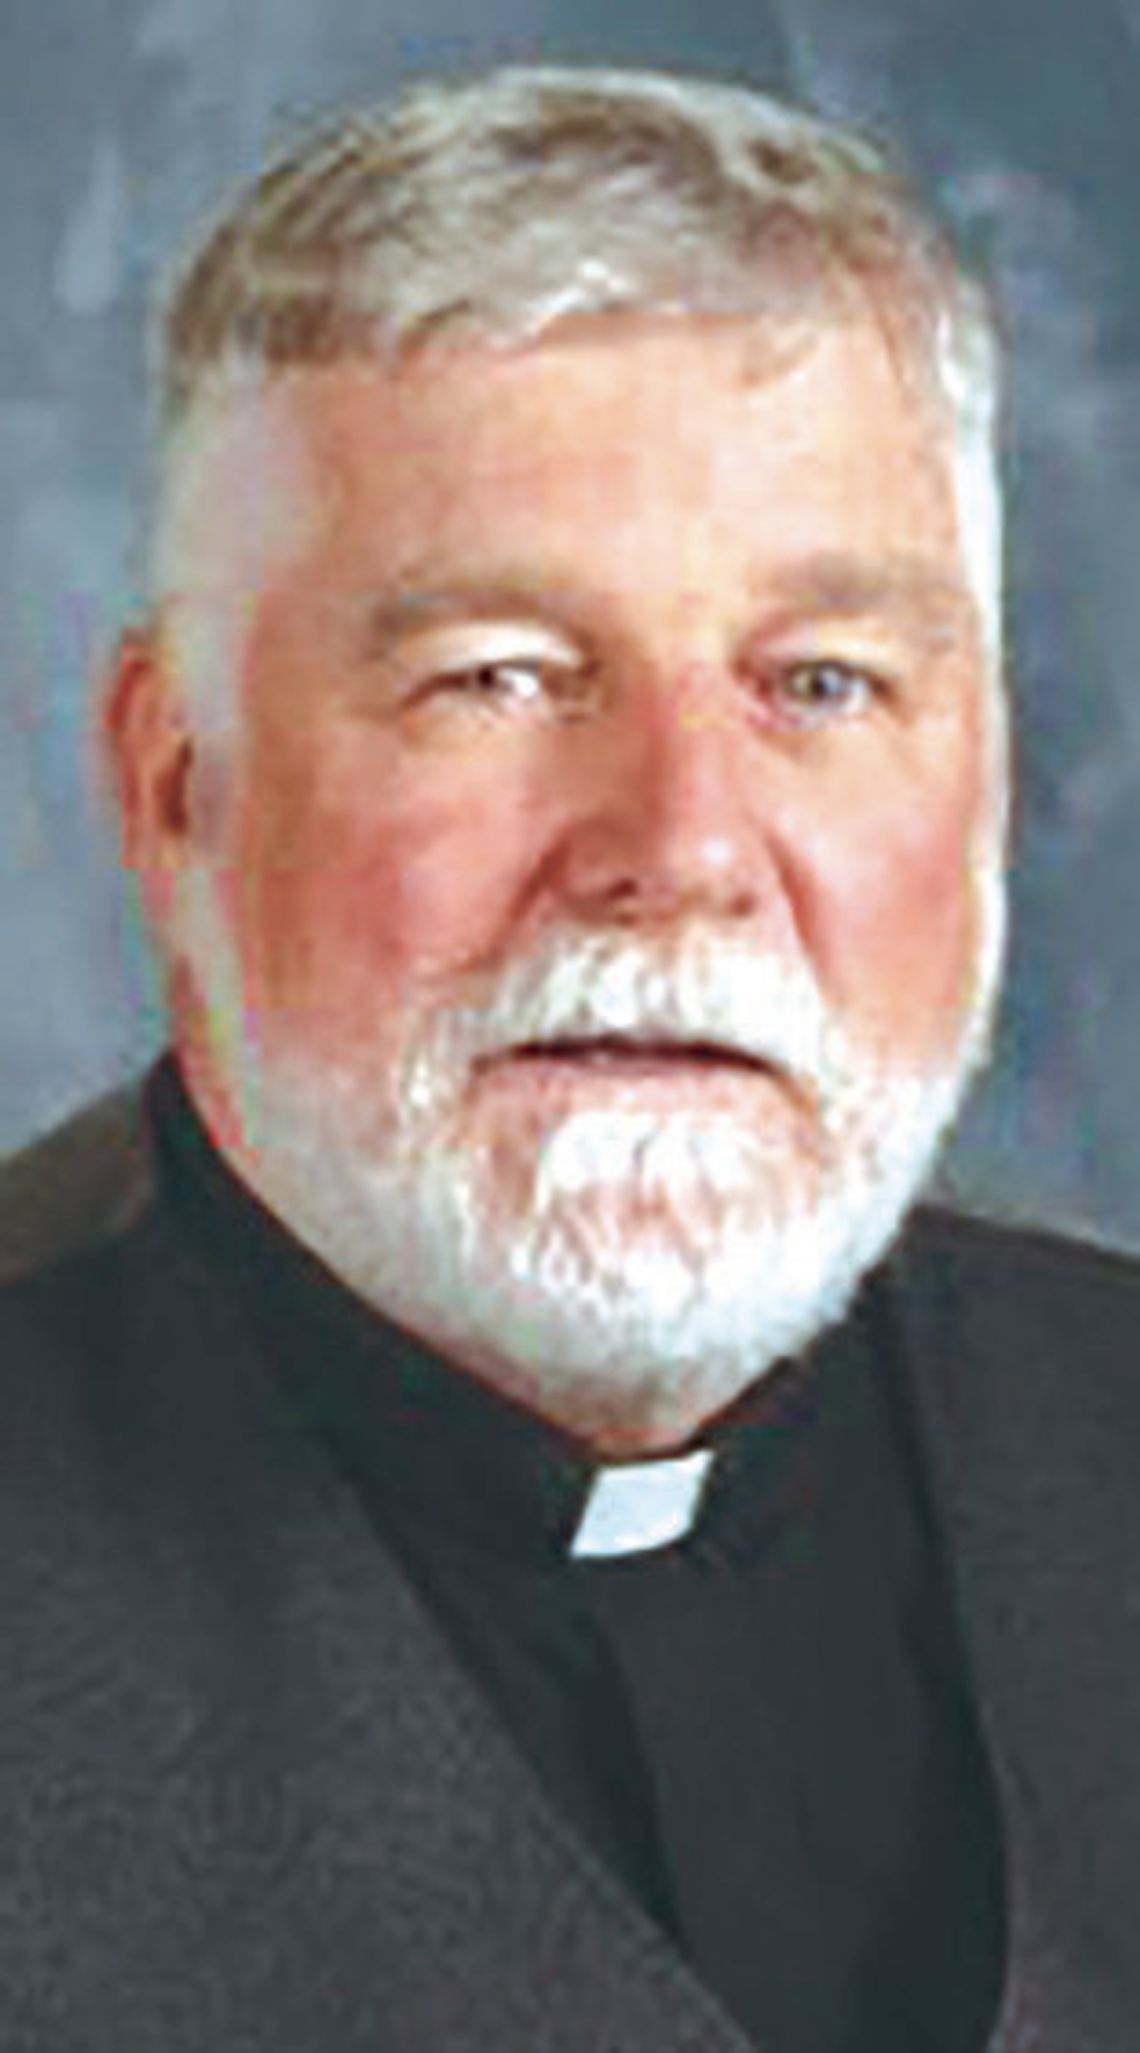 Father Wittrock excited to serve